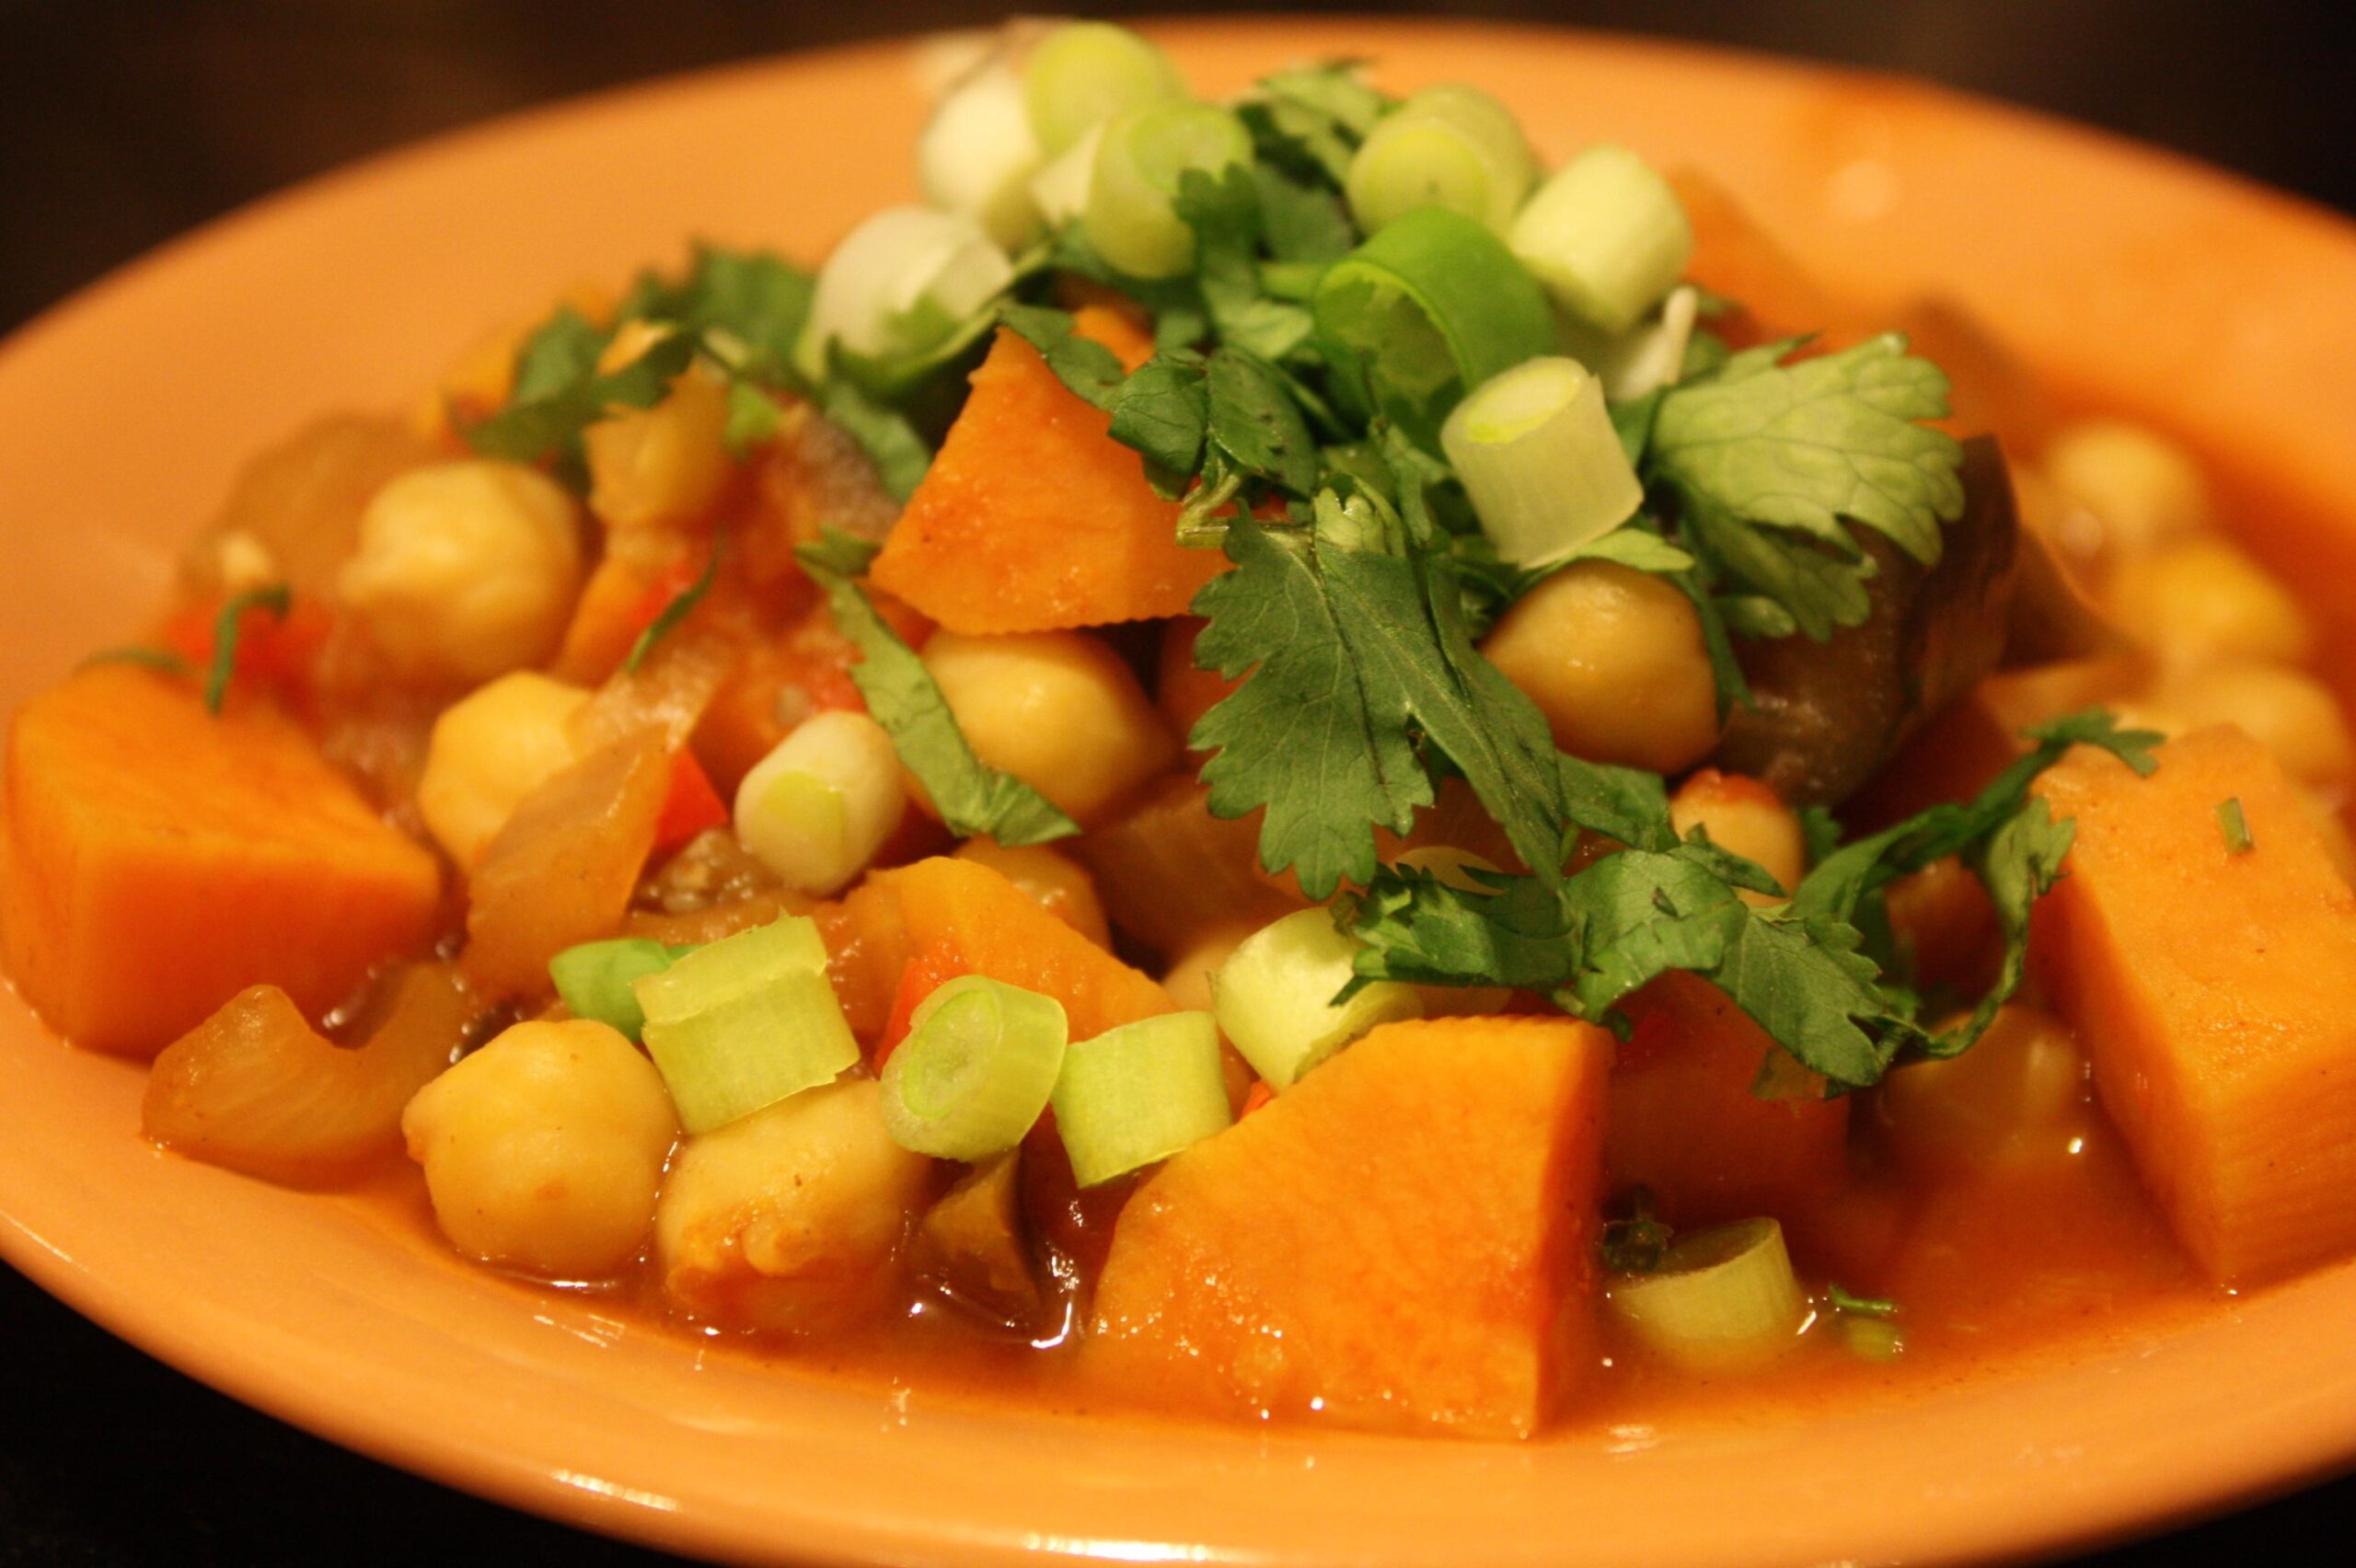  A cozy bowl of sweet potato, chickpea and eggplant hotpot to warm up your soul!